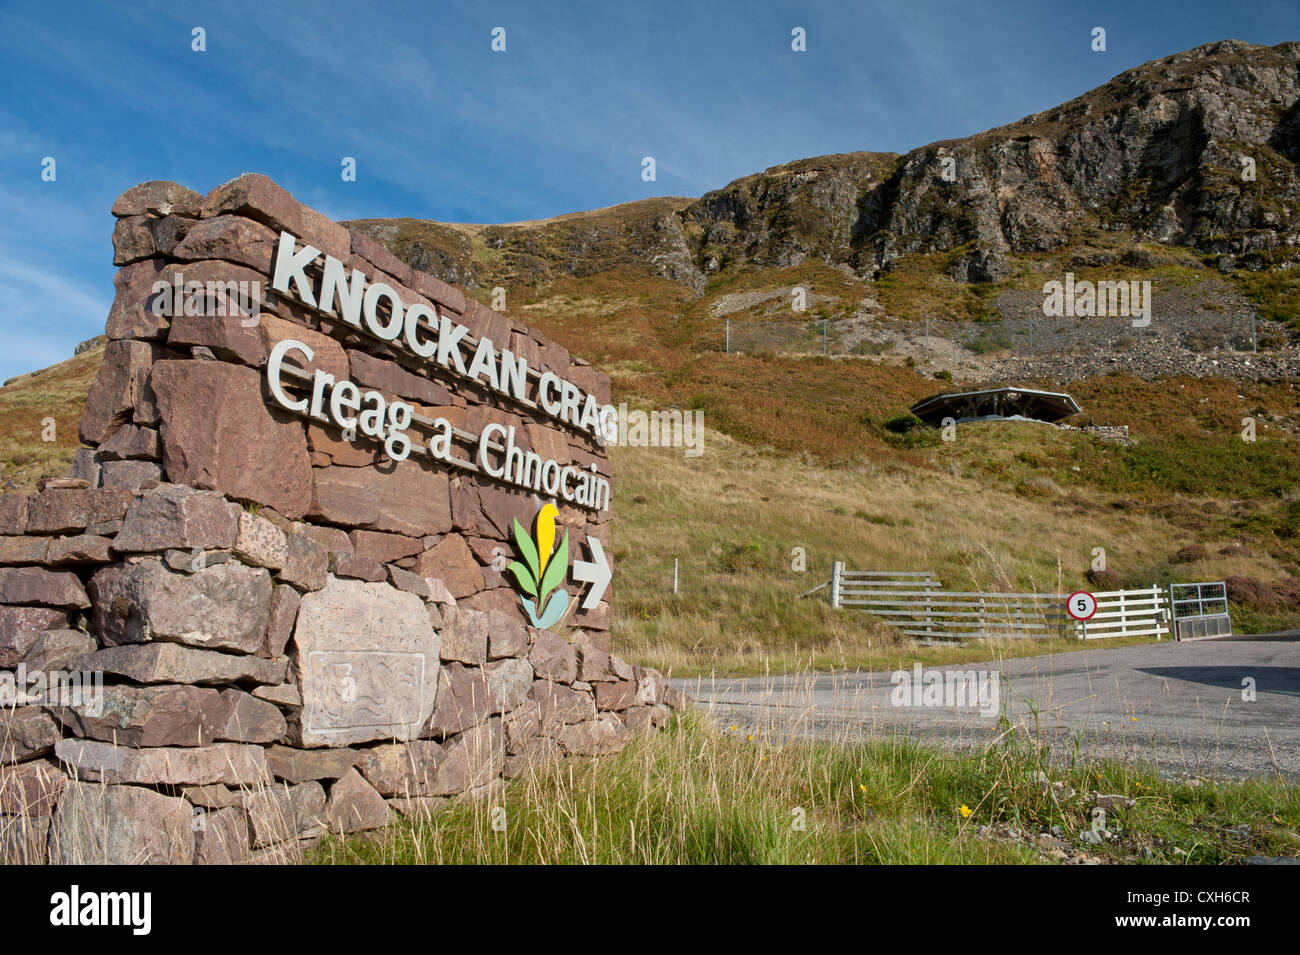 The Geological Crag sign at Knockan, in Wester Ross. Scotland.  SCO 8564 Stock Photo